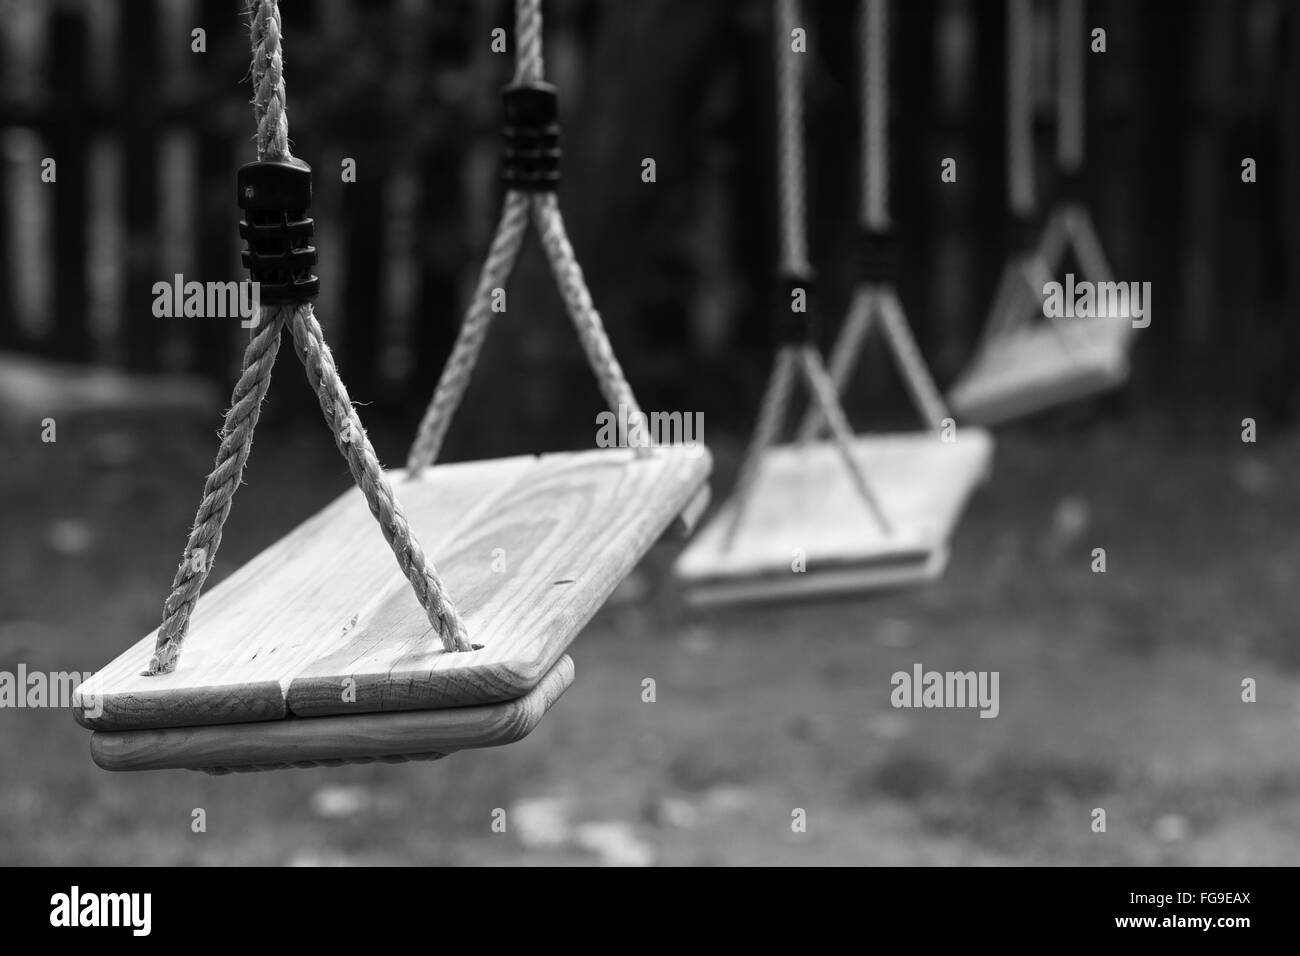 Horizontal perspective view of three wooden child swings in the park with shallow depth of field Stock Photo